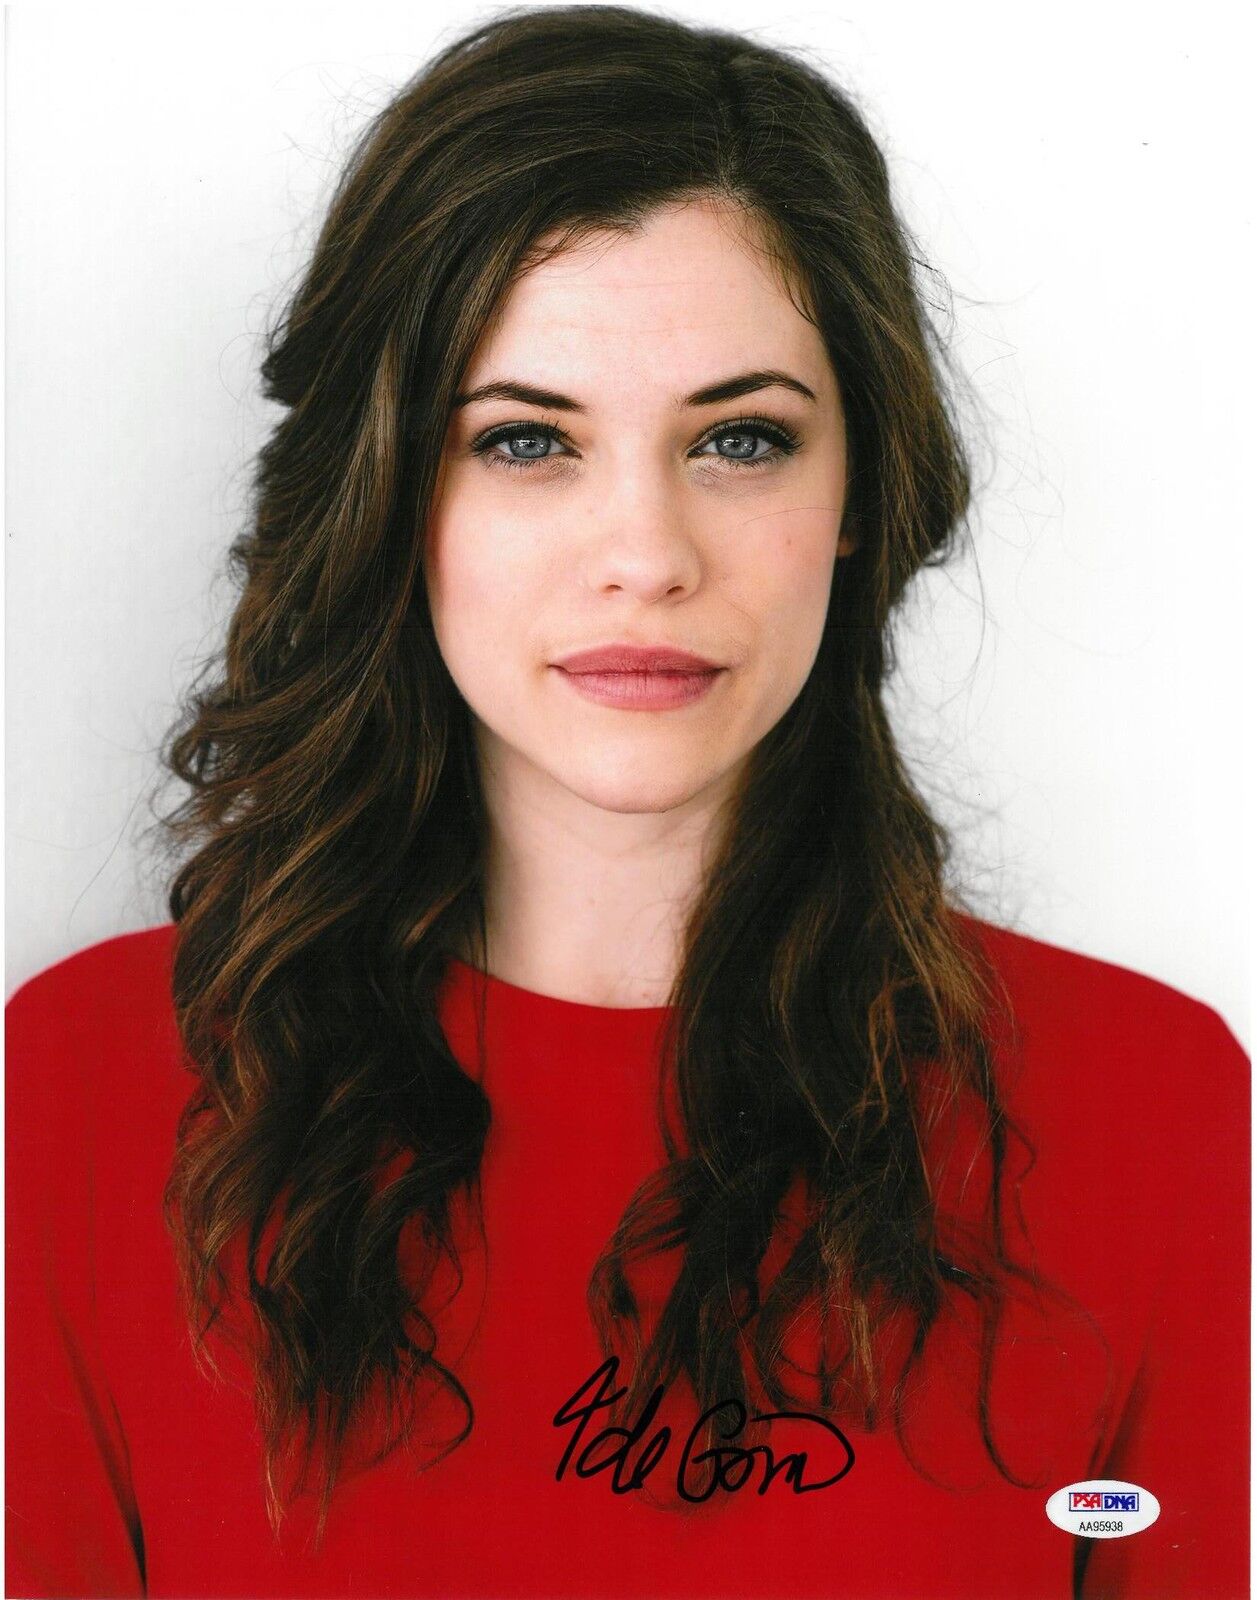 Jessica De Gouw Signed Authentic Autographed 11x14 Photo Poster painting PSA/DNA #AA95939